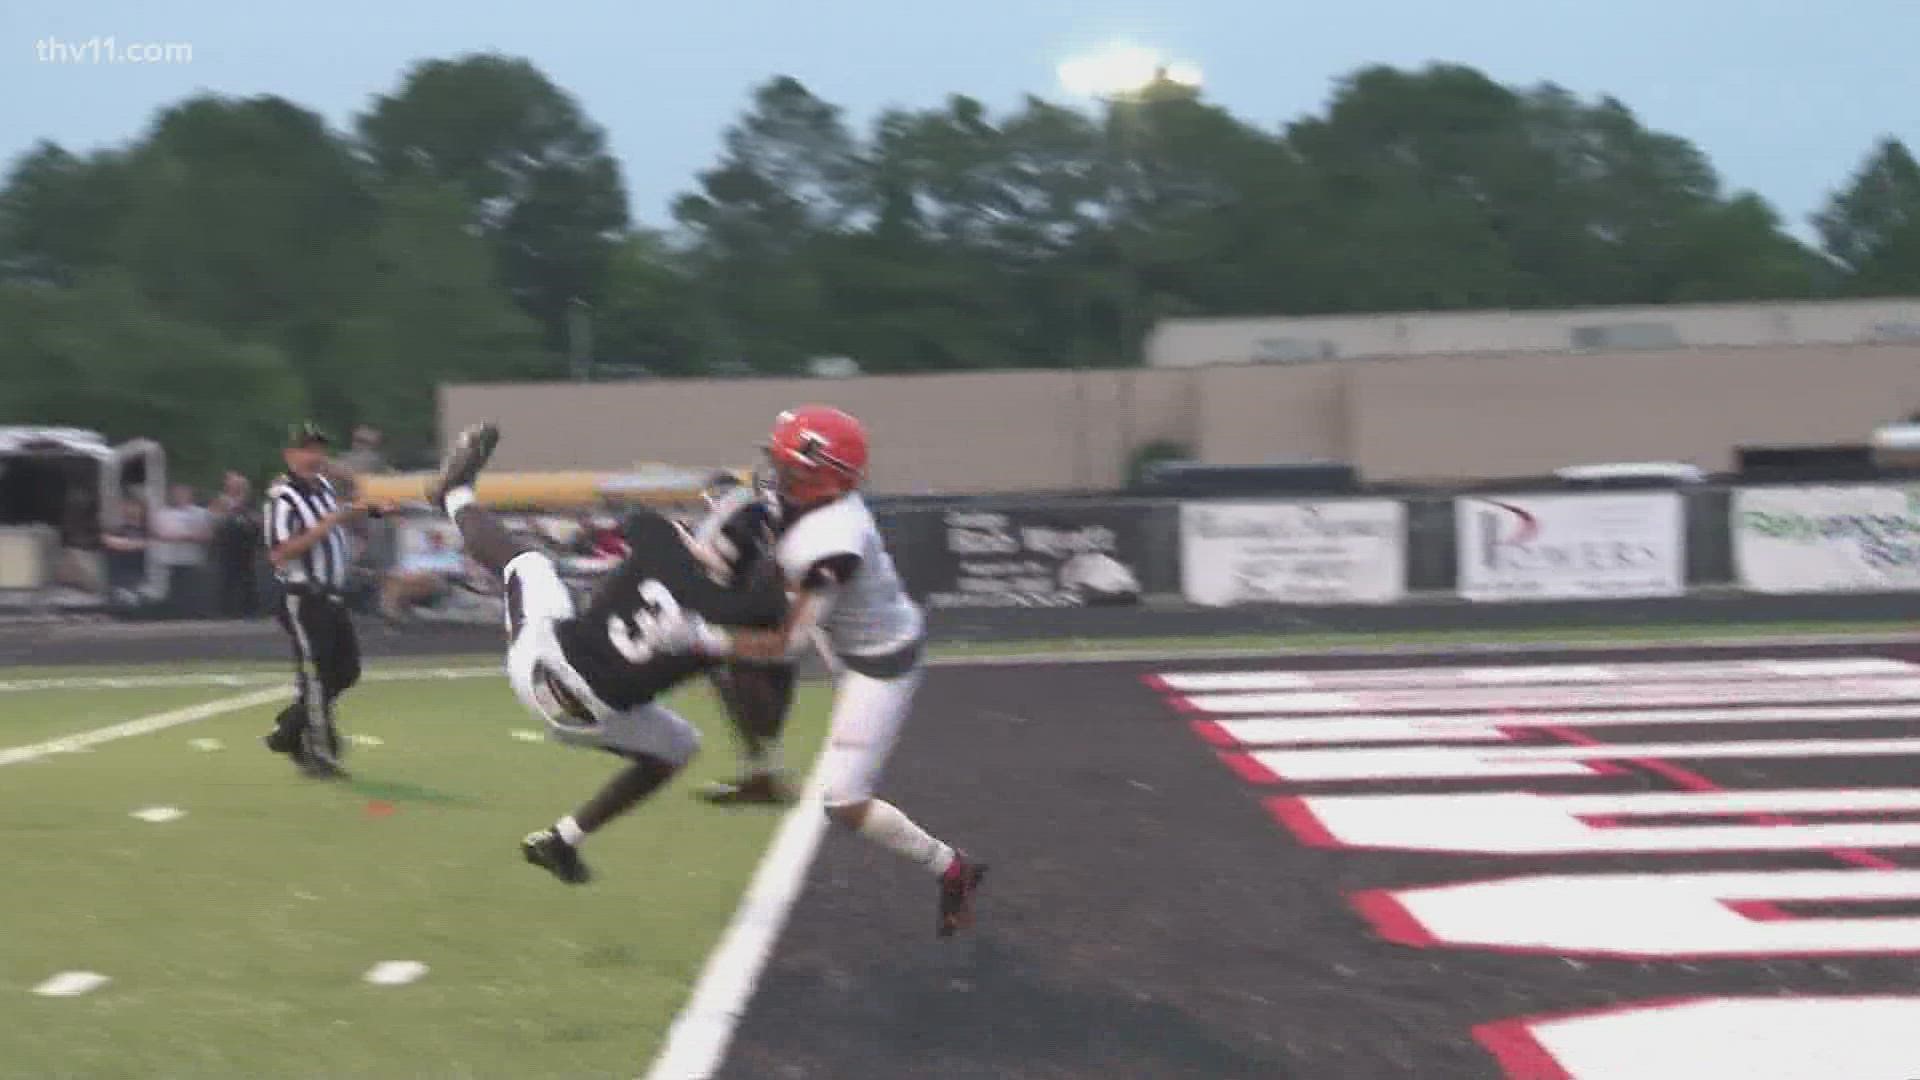 Vote for Yarnell's Sweetest Play of week 2!